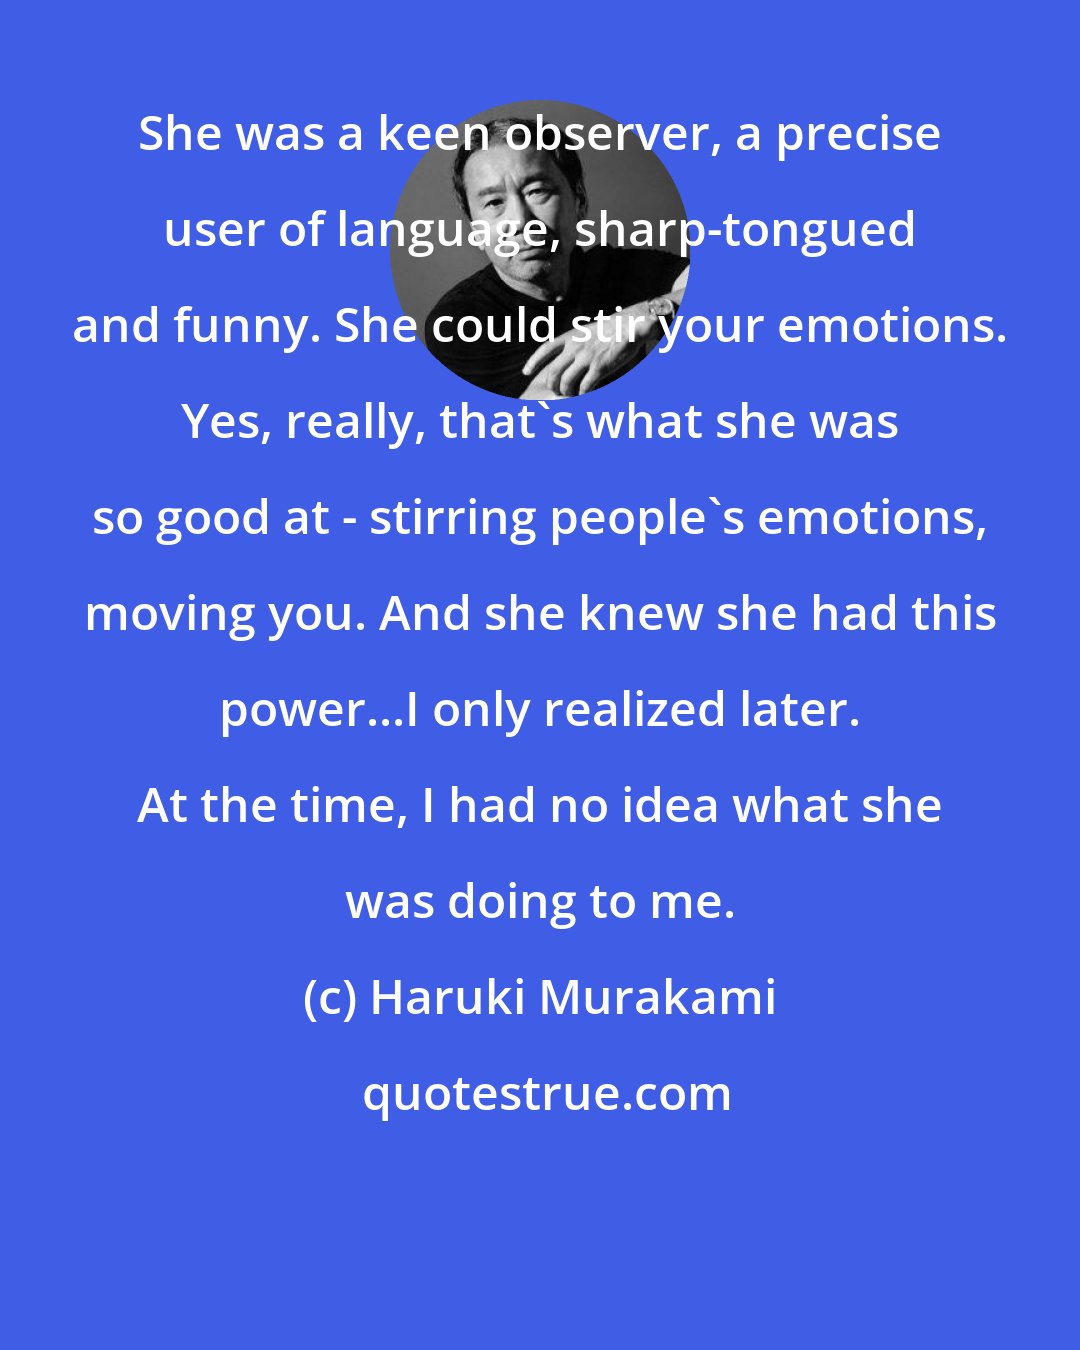 Haruki Murakami: She was a keen observer, a precise user of language, sharp-tongued and funny. She could stir your emotions. Yes, really, that's what she was so good at - stirring people's emotions, moving you. And she knew she had this power...I only realized later. At the time, I had no idea what she was doing to me.